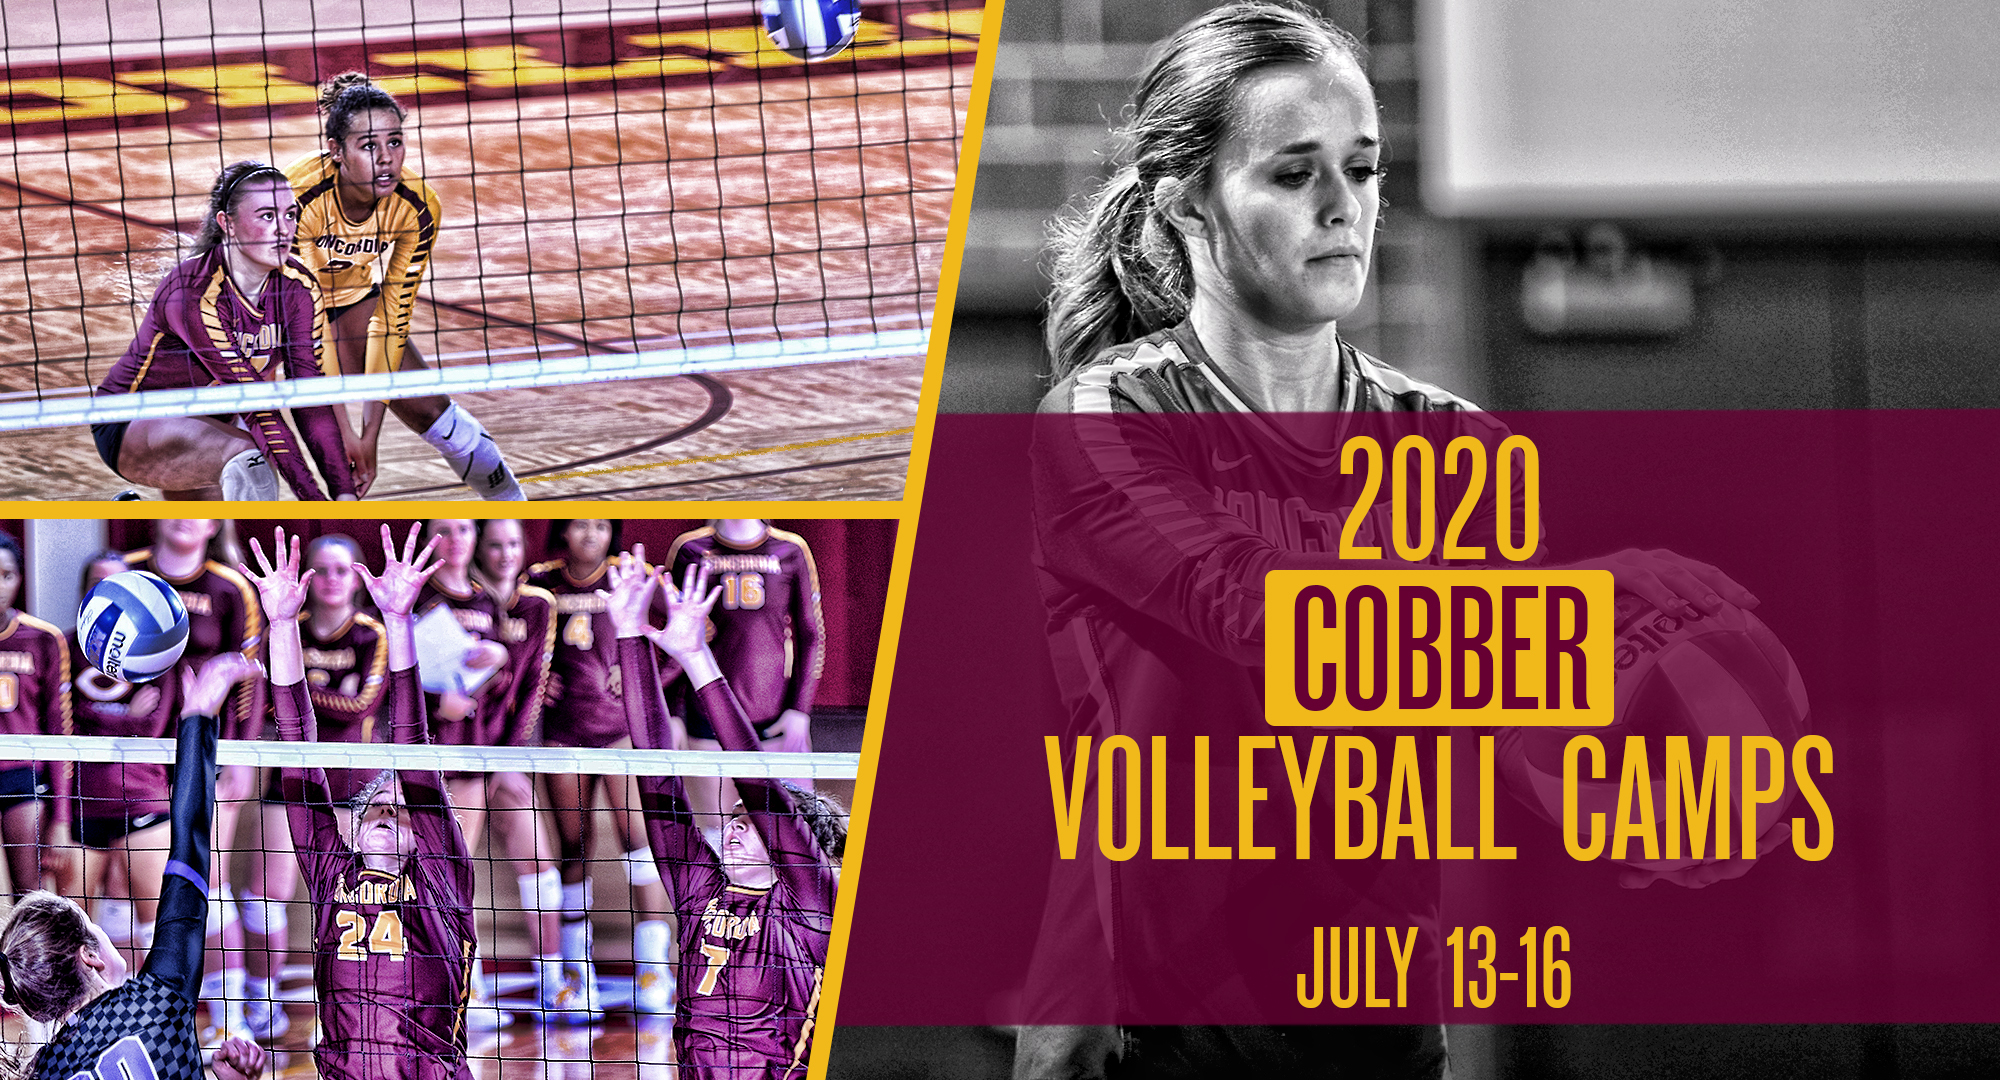 2020 Cobber Volleyball Camps